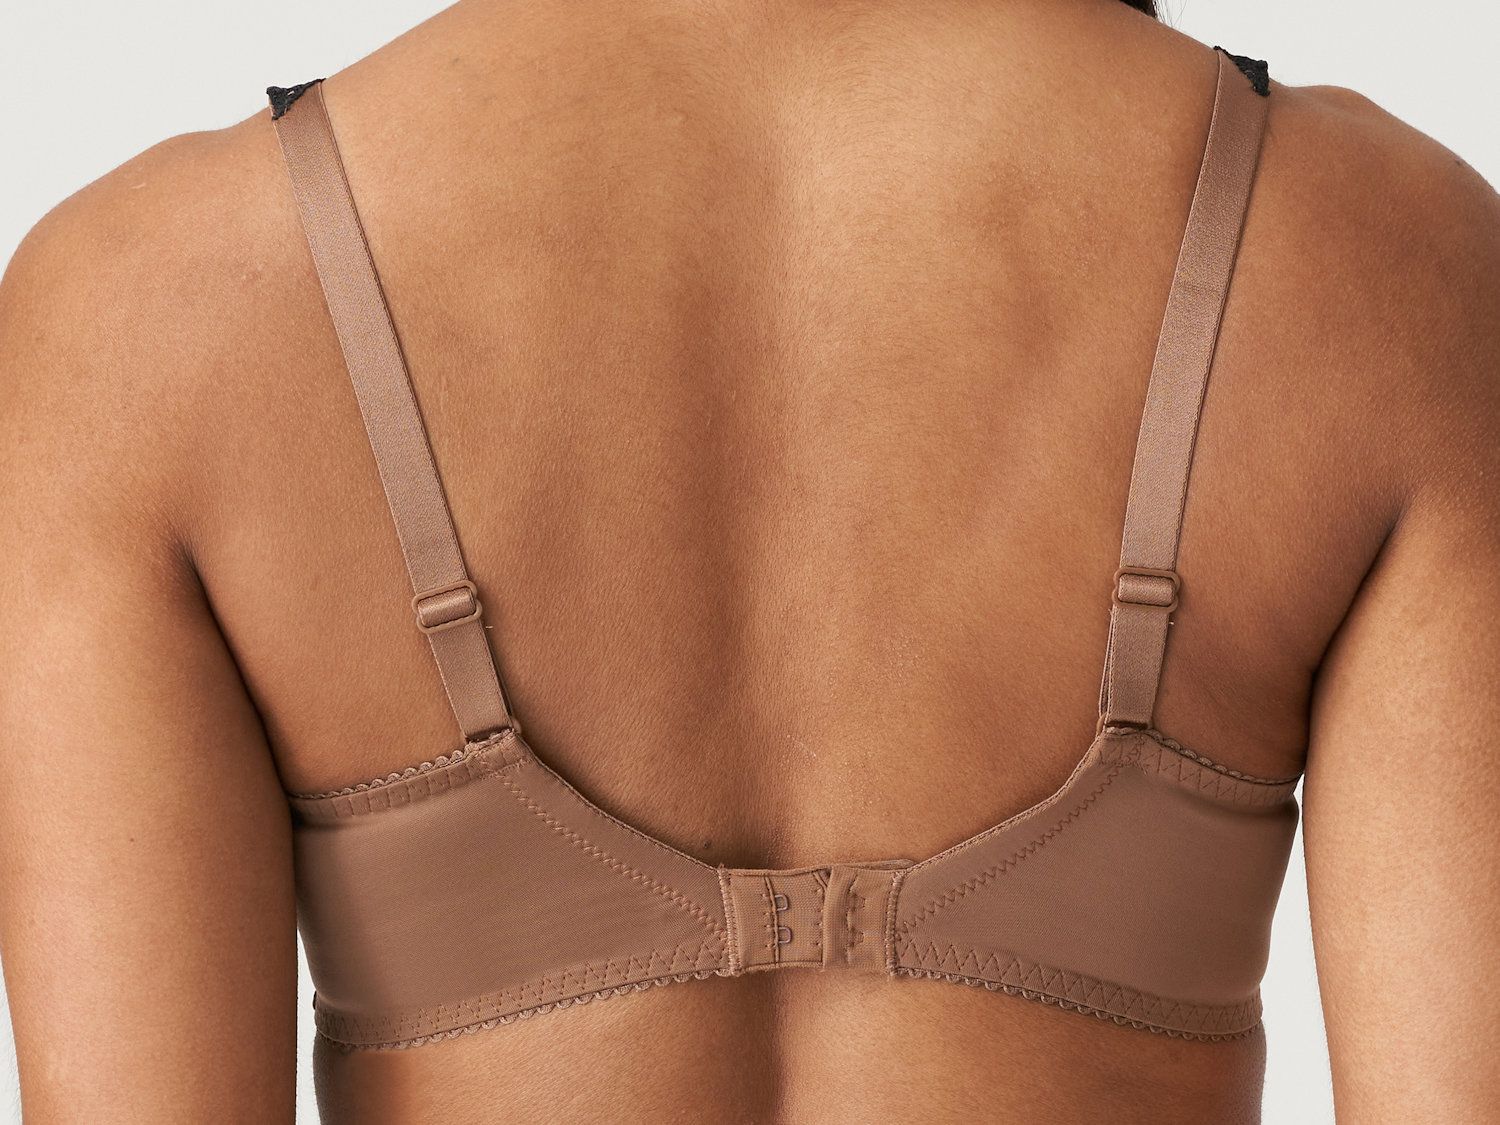 How to Choose a Non-padded Seamless Bra?